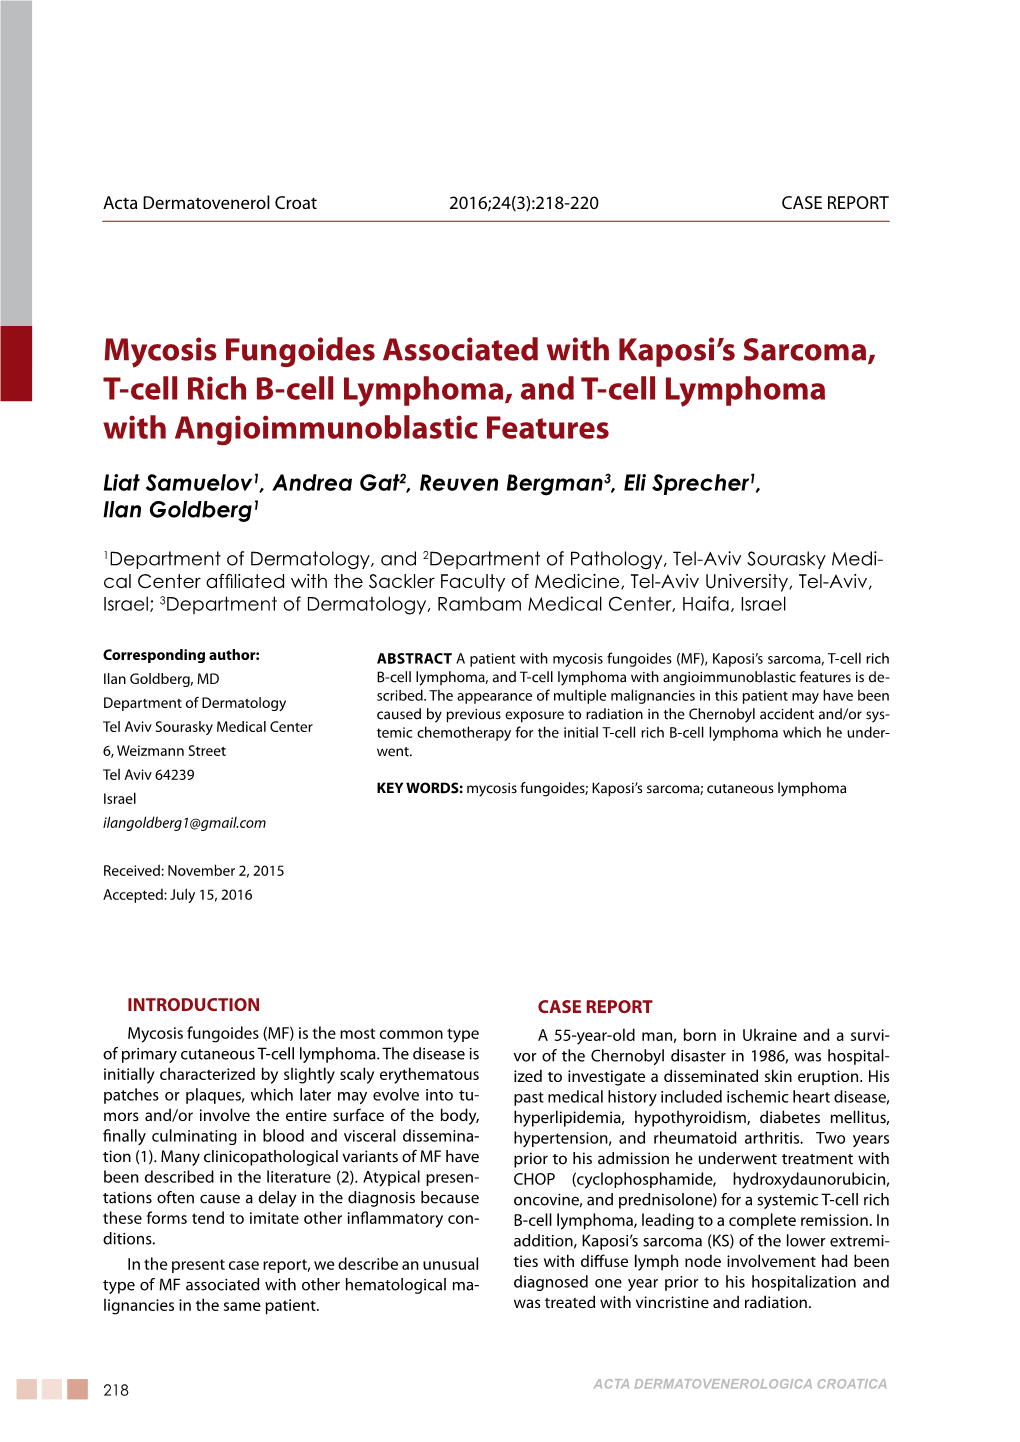 Mycosis Fungoides Associated with Kaposi's Sarcoma, T-Cell Rich B